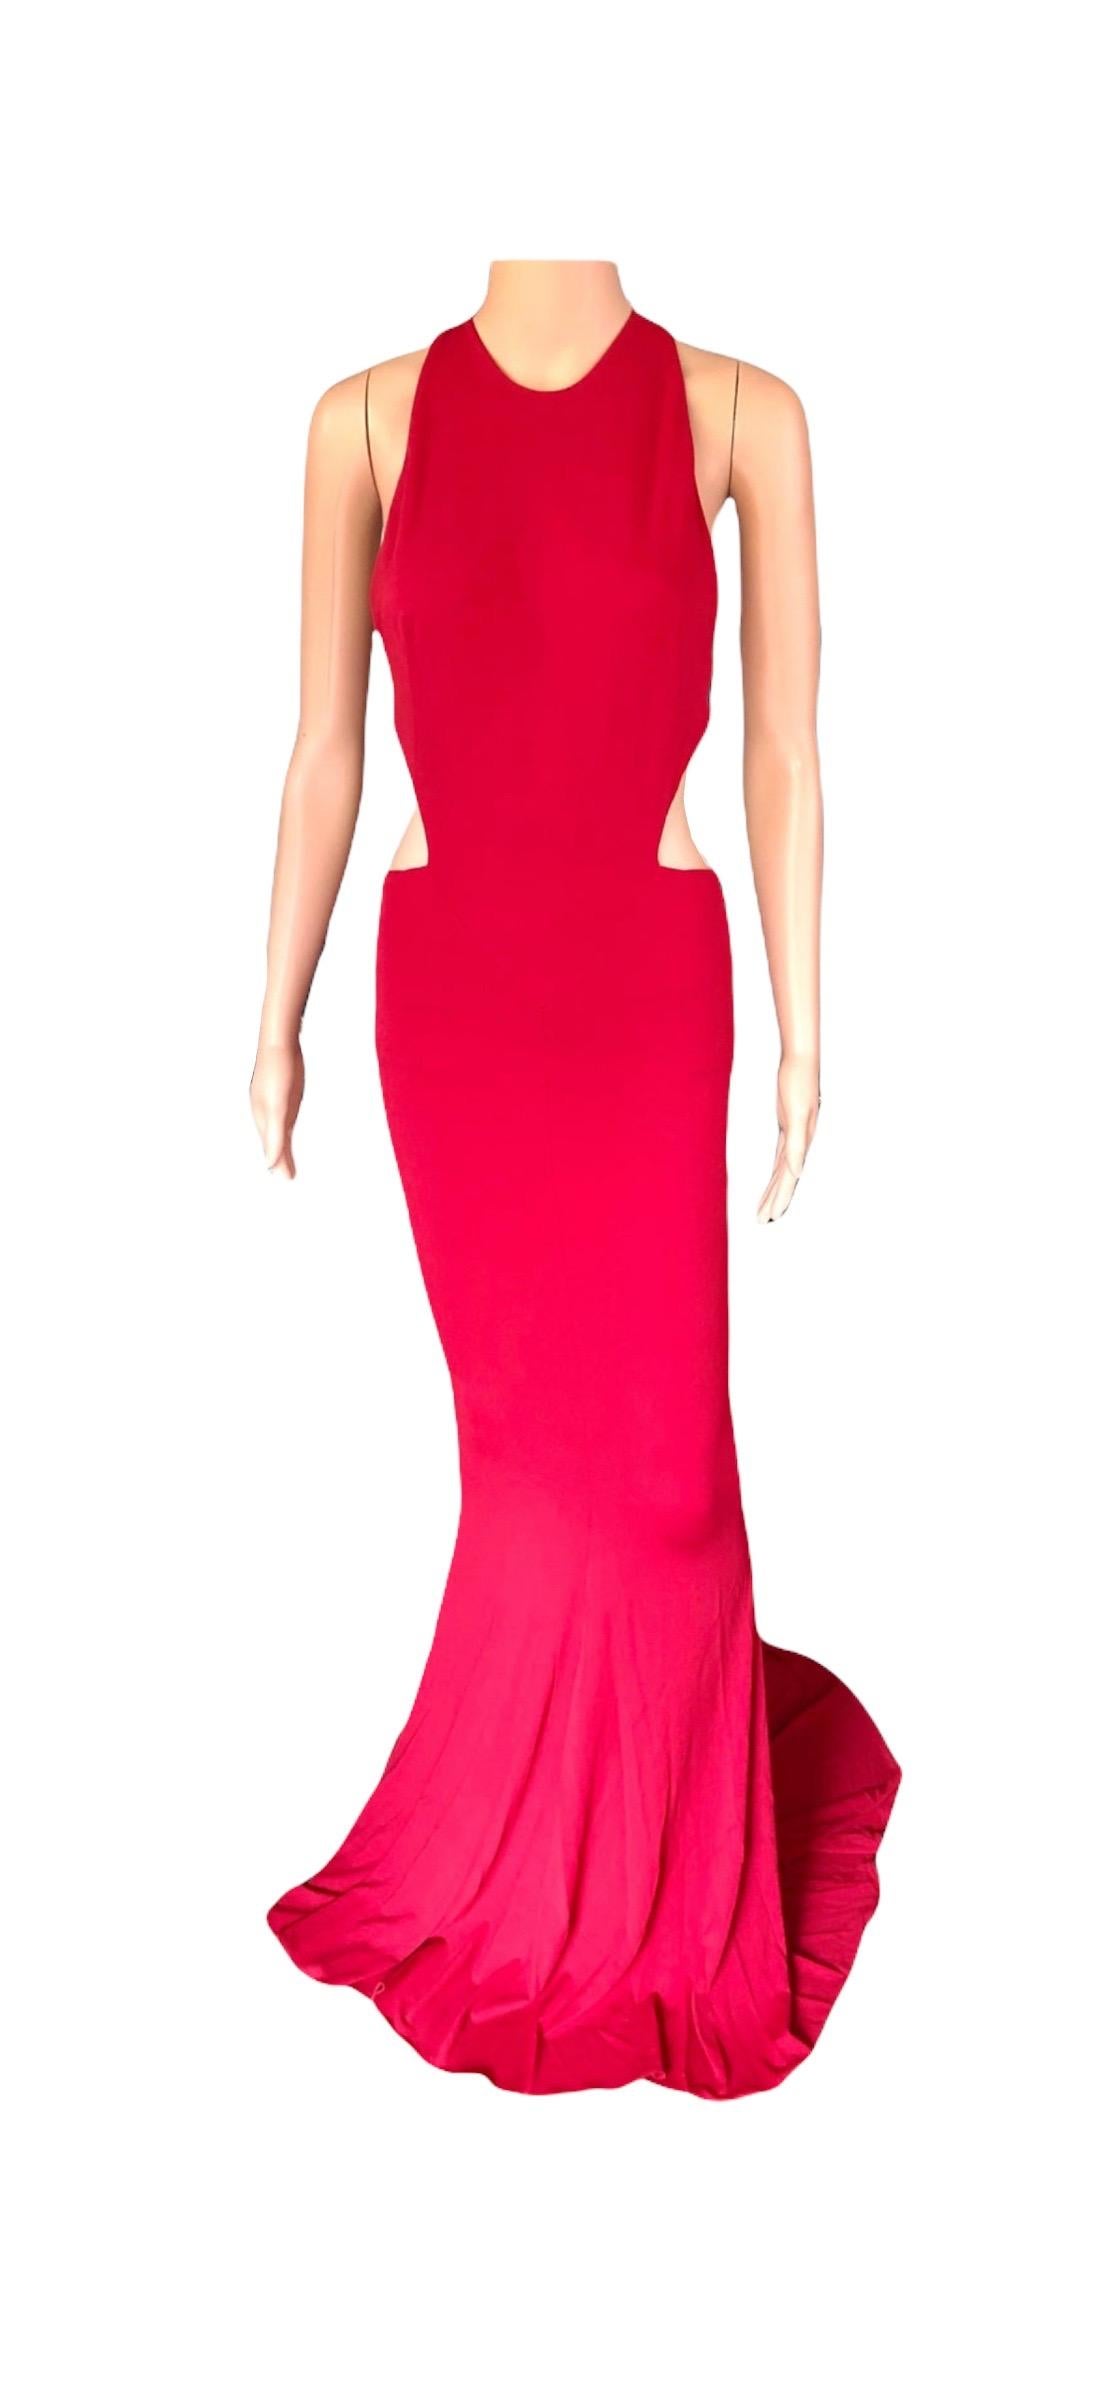 Alexandre Vauthier Cutout Backless Red Evening Dress Gown  For Sale 5